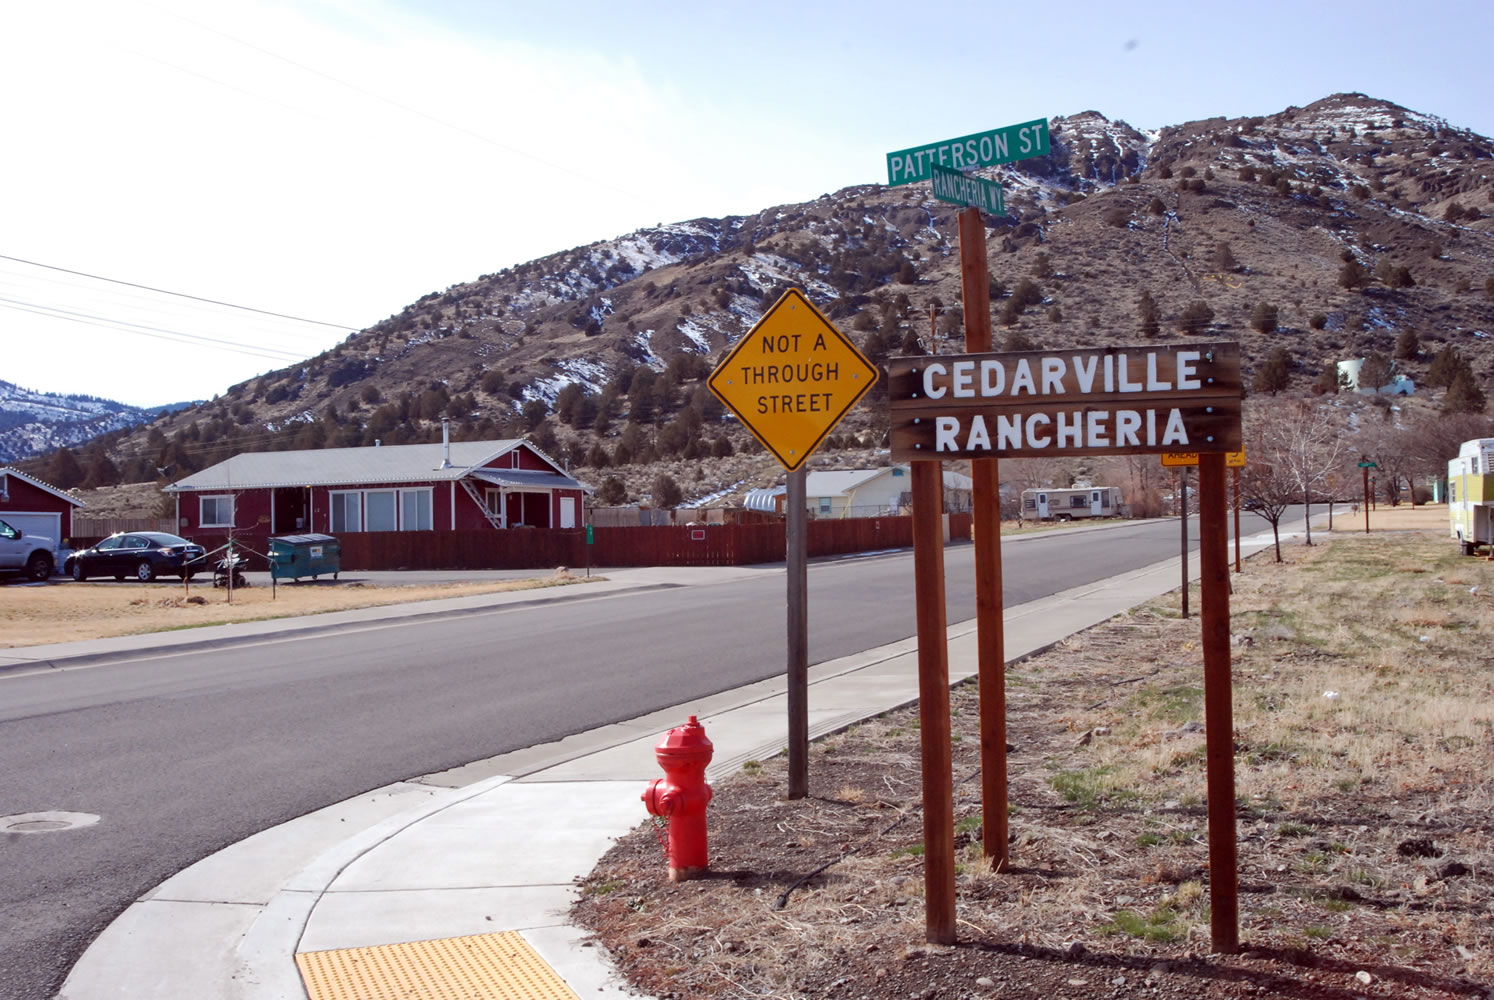 The entrance to the Cedarville Rancheria, in Cedarville, Calif.